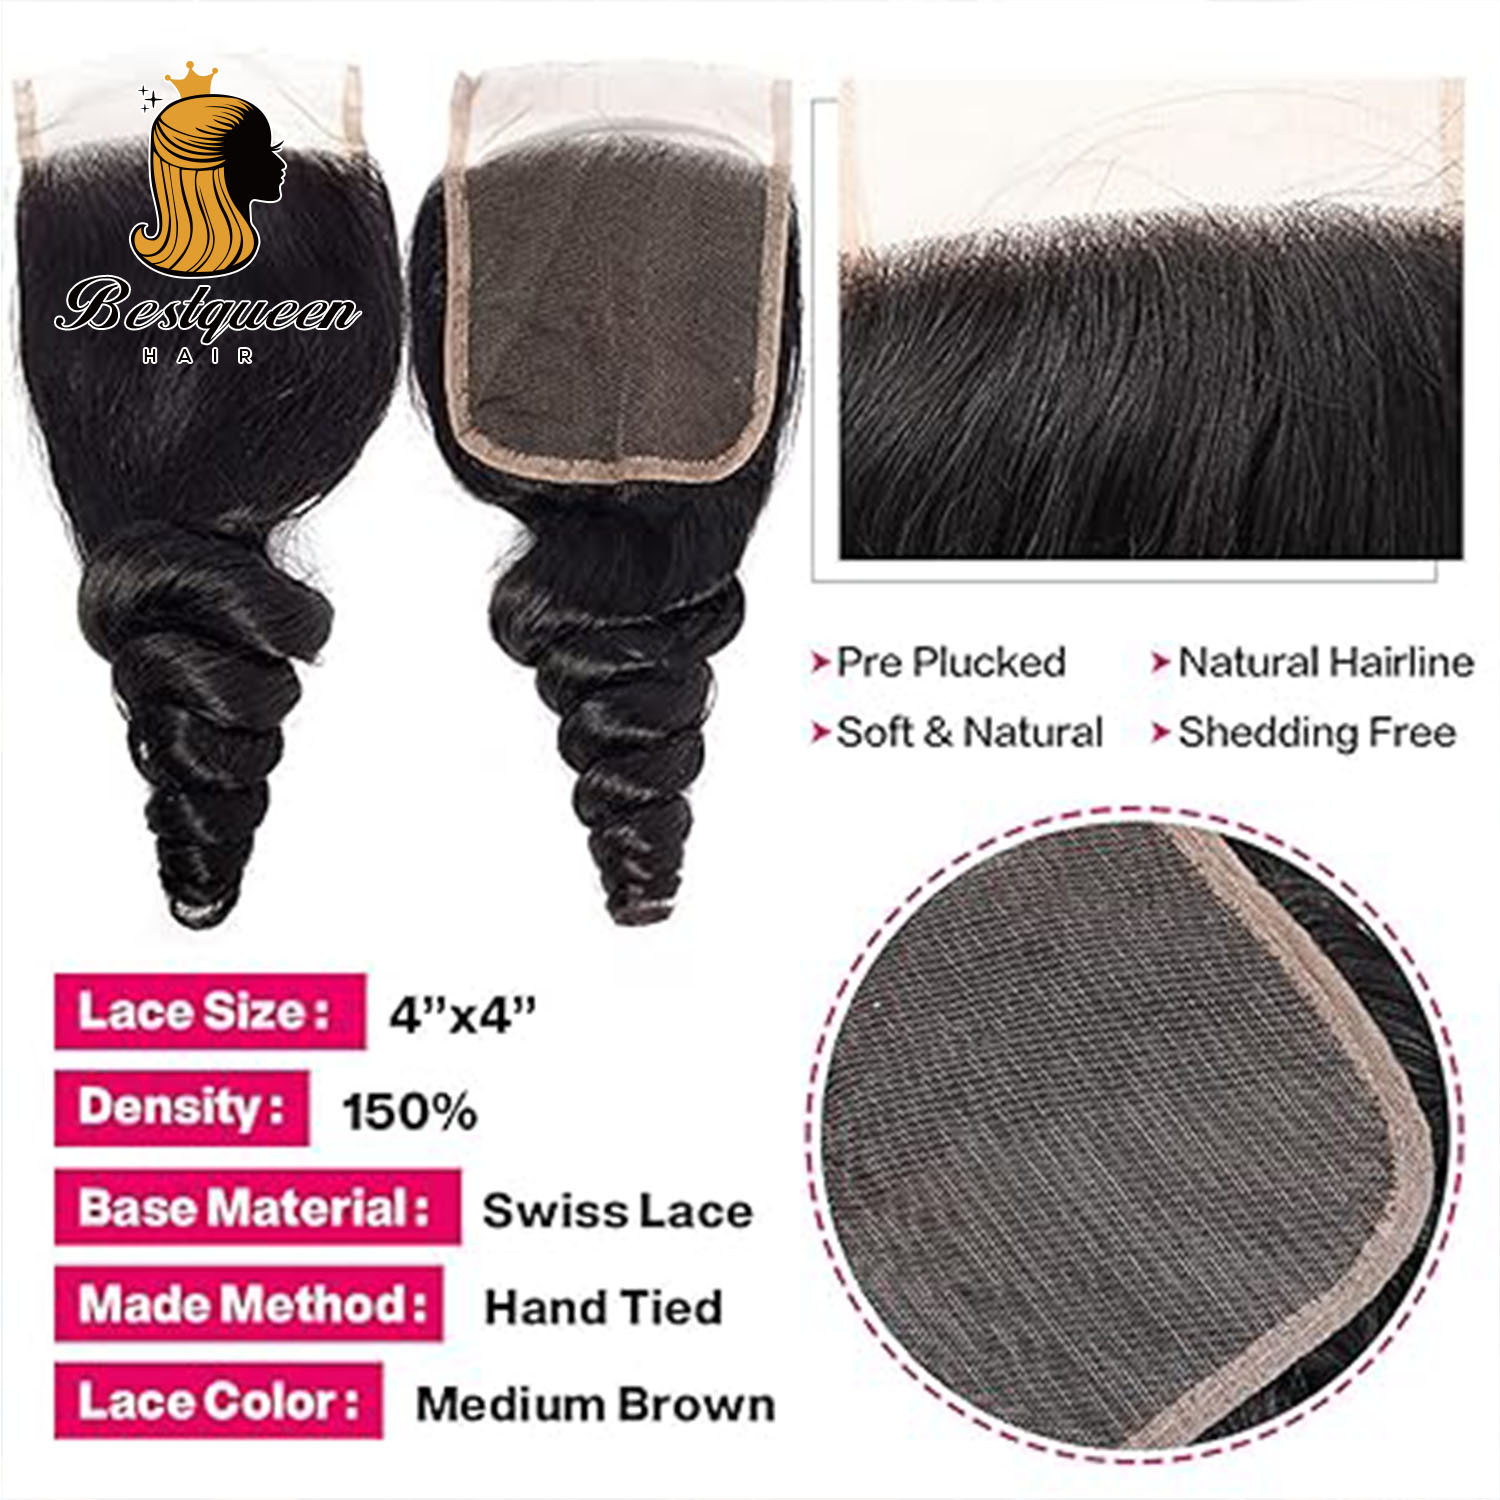 BestqueenHair Unprocessed Cheap Hair For Brazilian Hair ,12a Raw Loose Wave Cuticle Aligned Virgin  